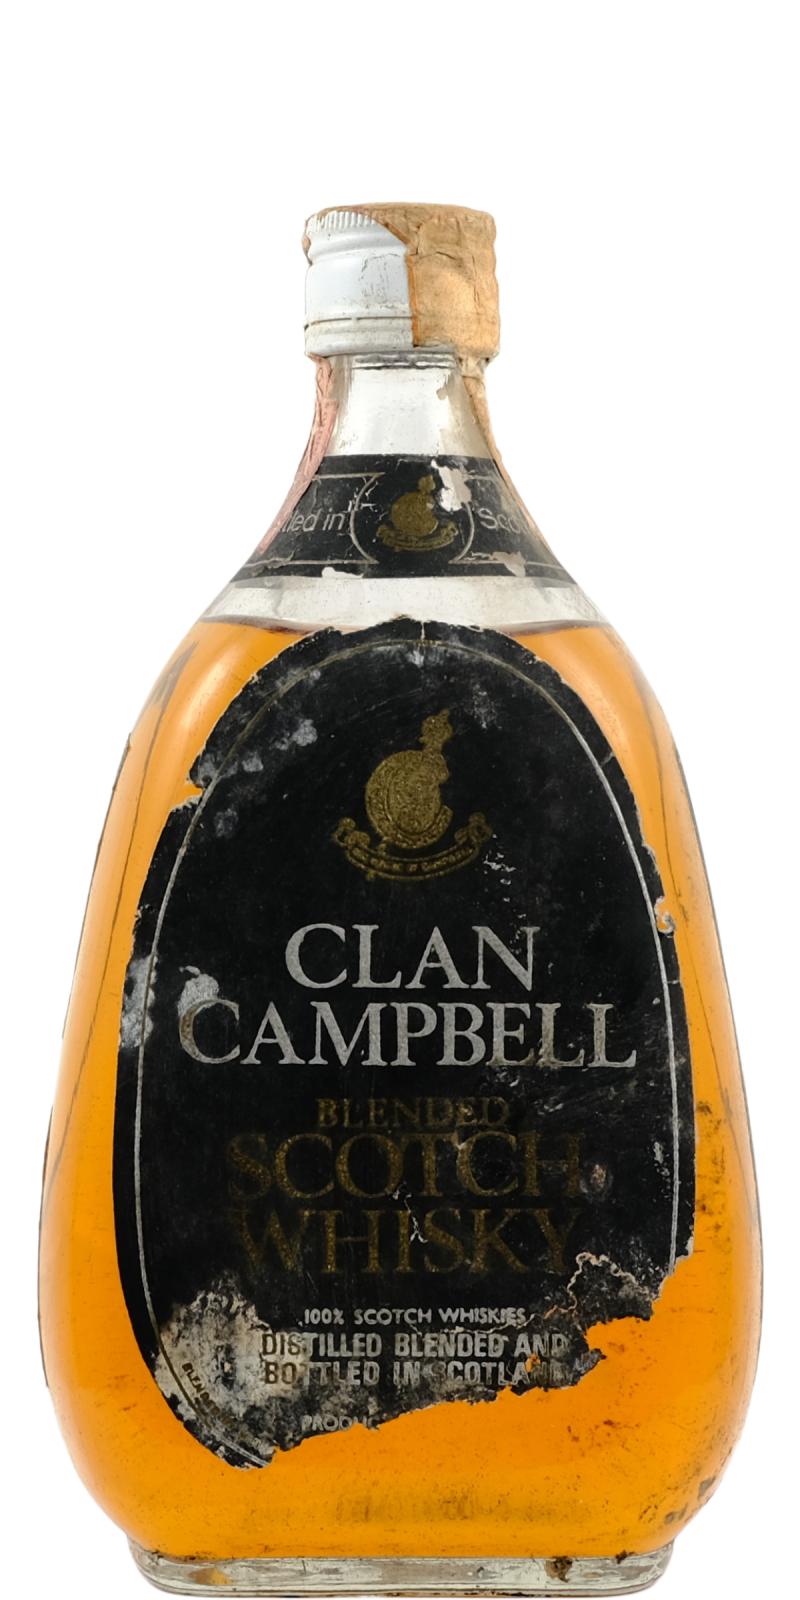 Clan Campbell Dark - Ratings and reviews - Whiskybase